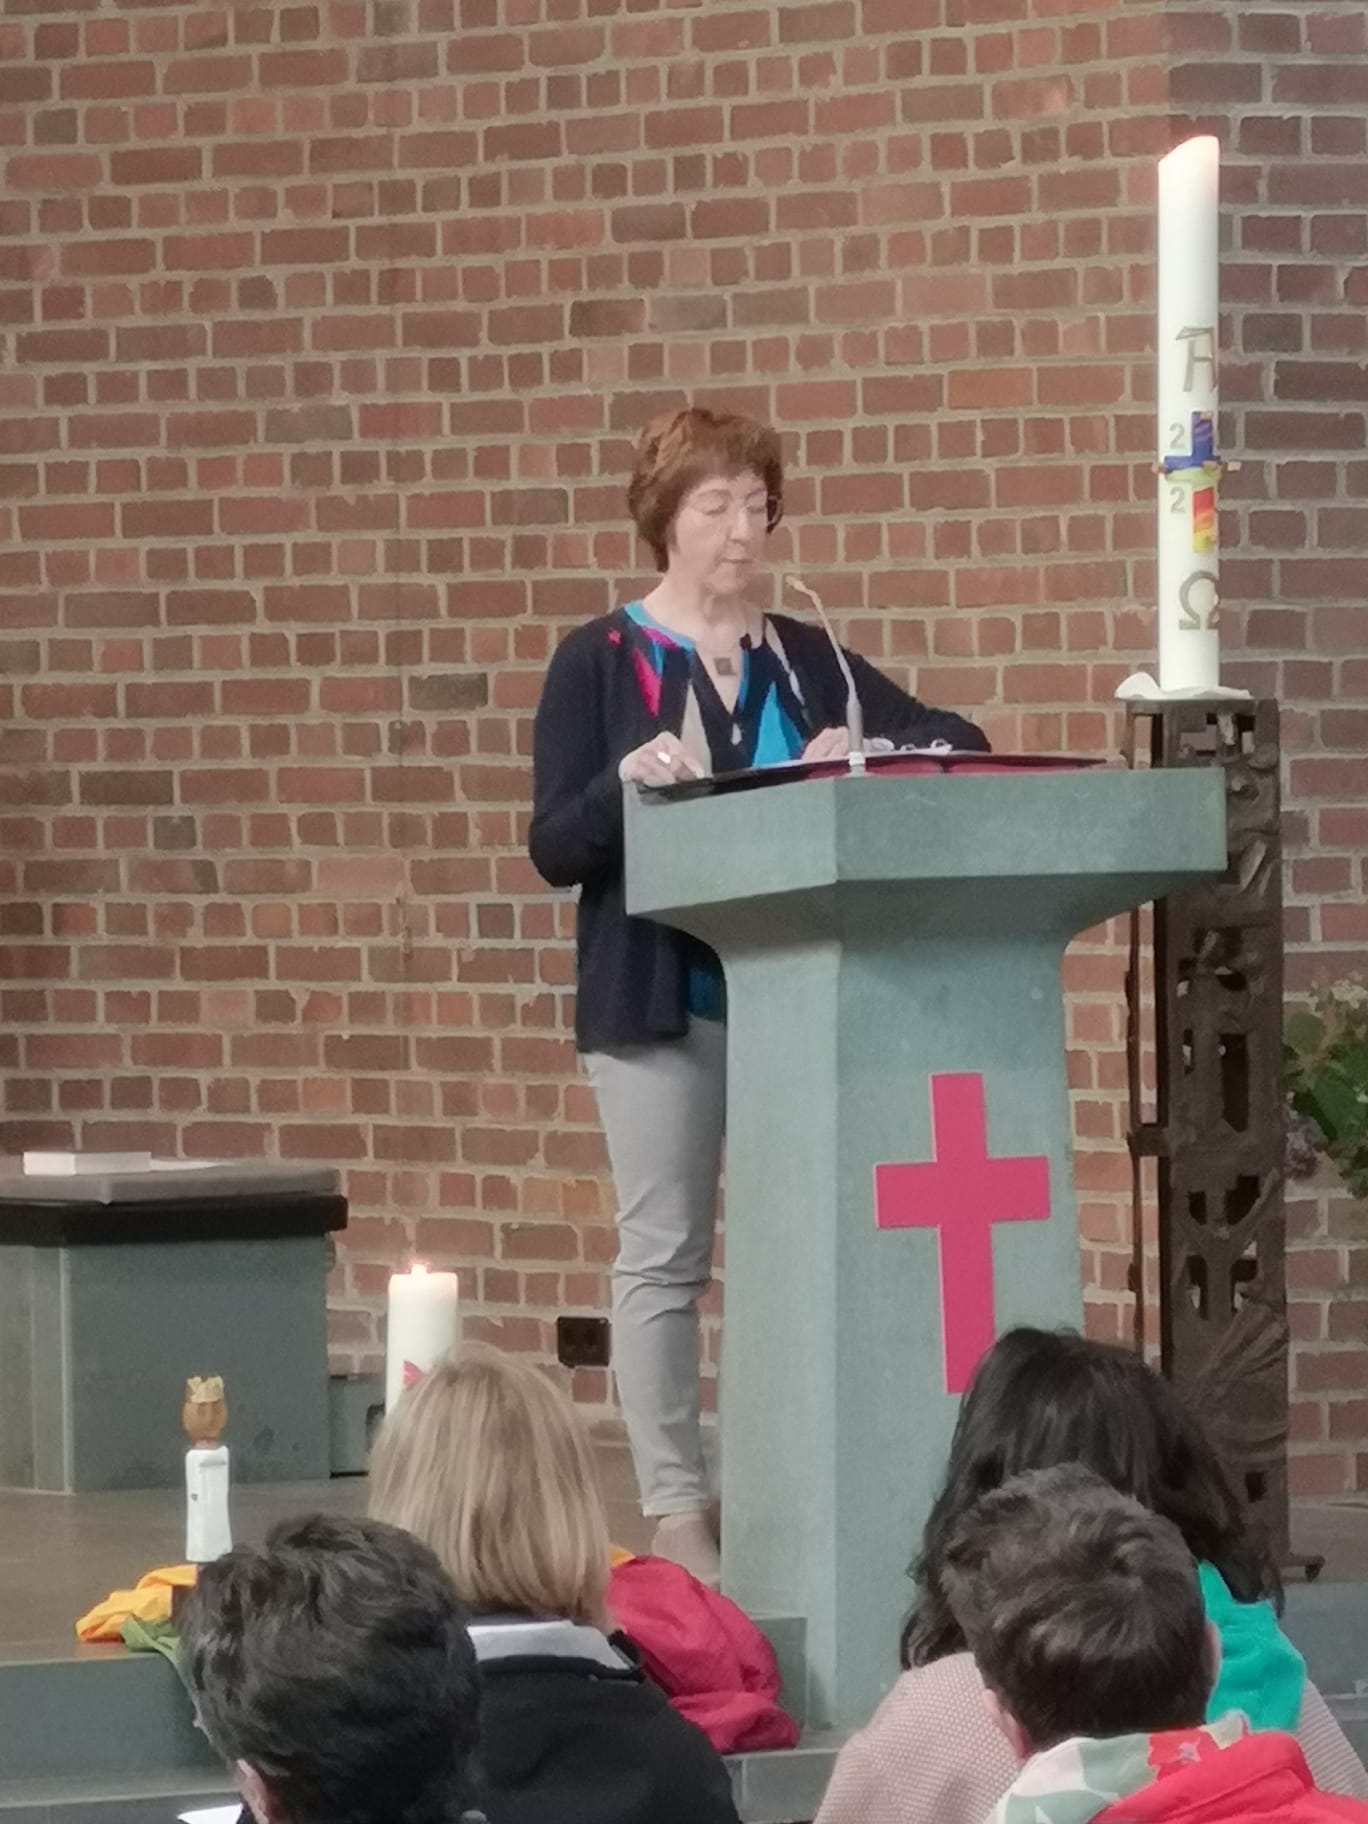 You are currently viewing Gottesdienst am Predigerinnentag in Soest